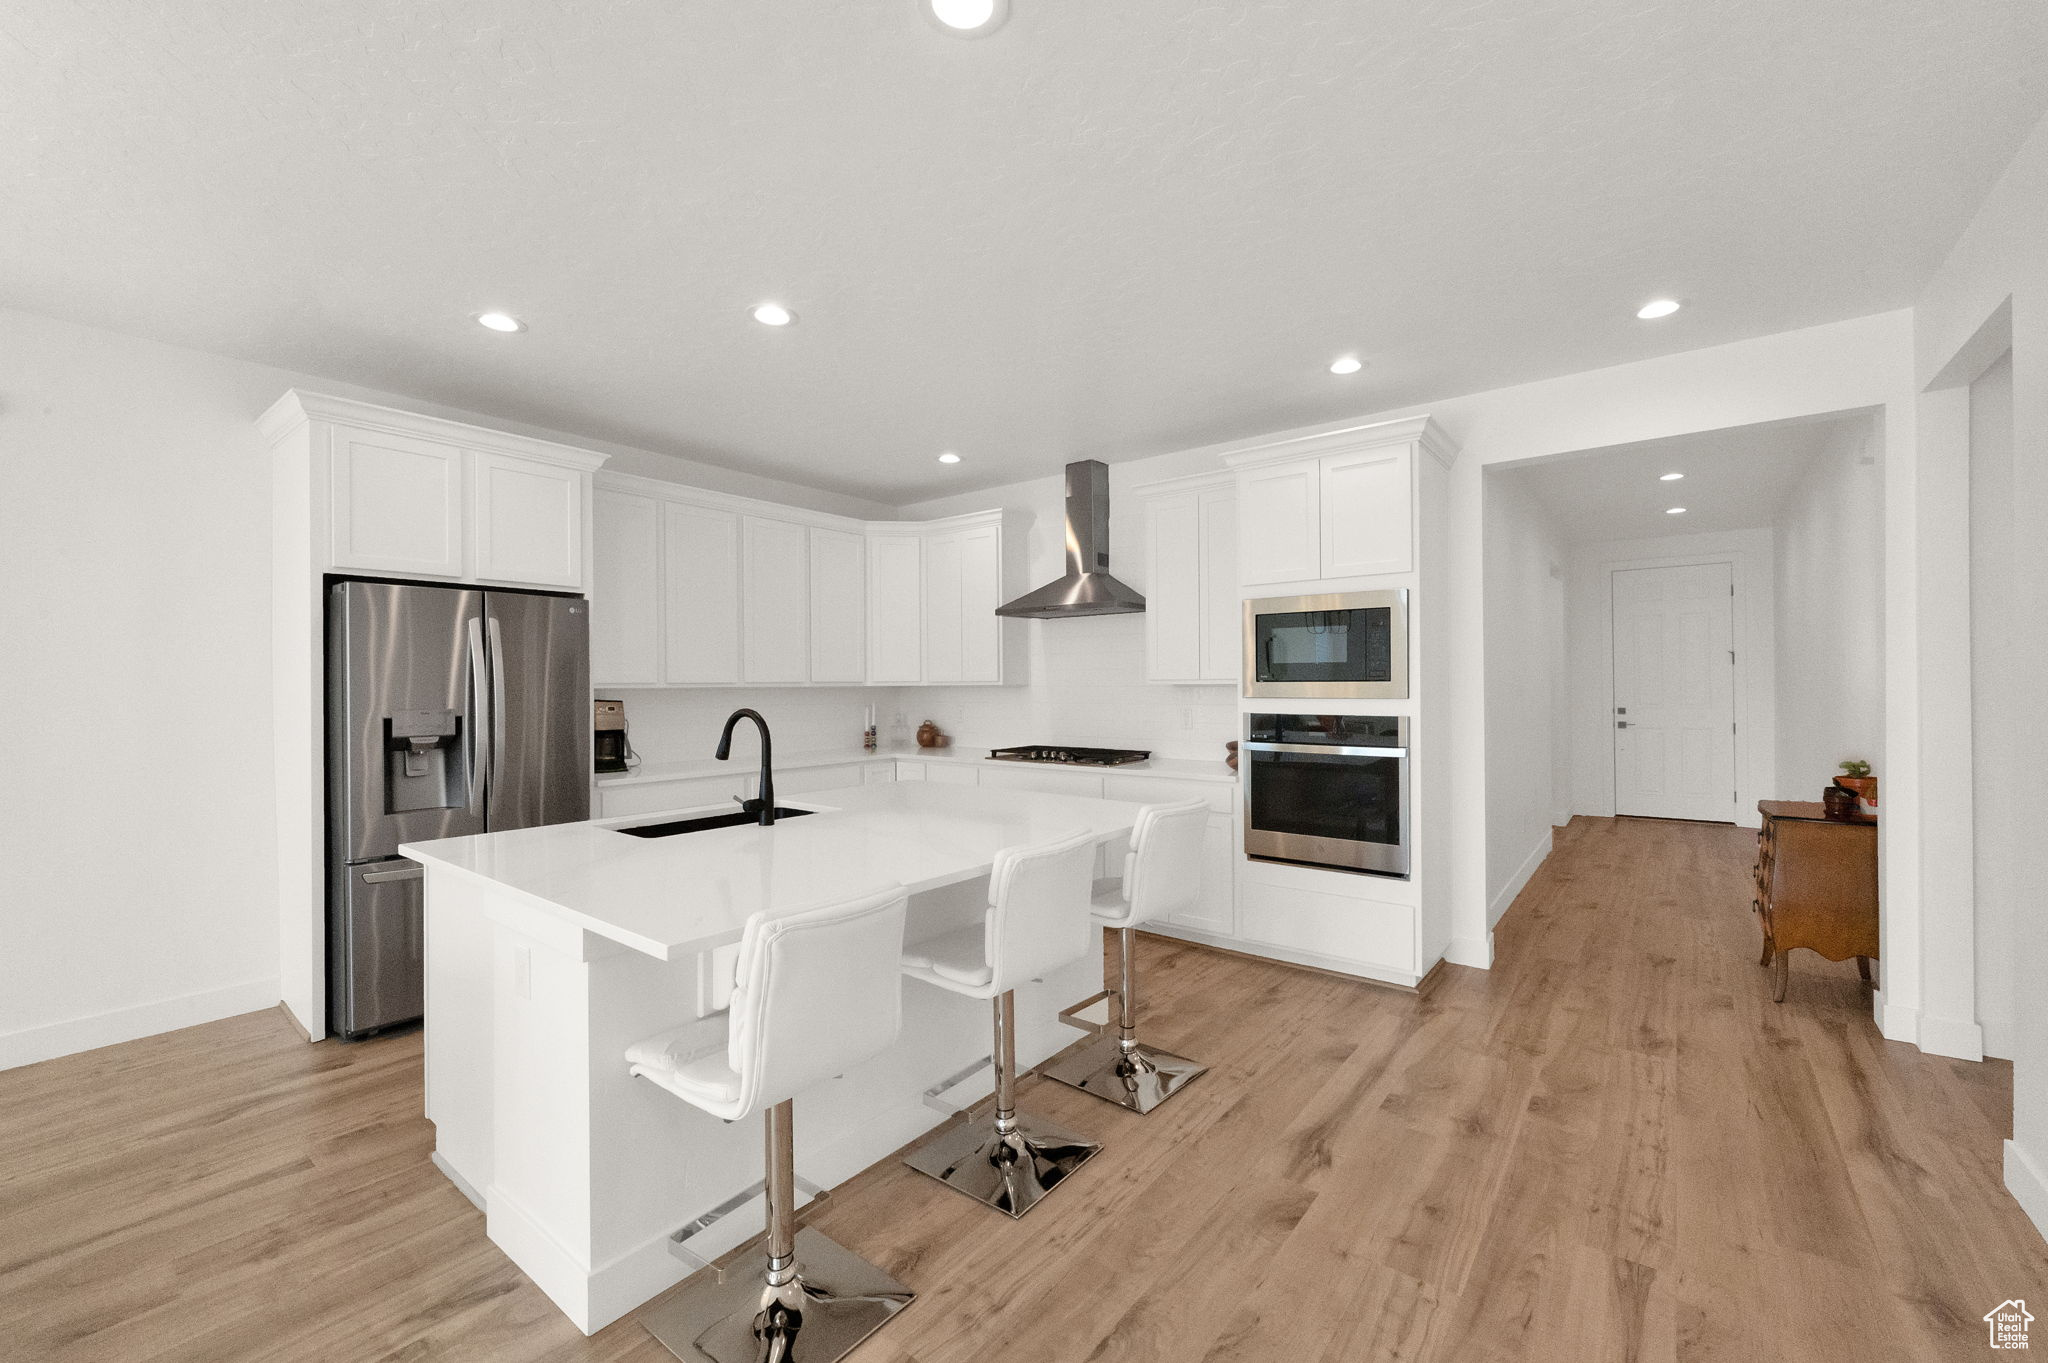 Kitchen featuring a kitchen island with sink, sink, light hardwood / wood-style floors, wall chimney exhaust hood, and appliances with stainless steel finishes